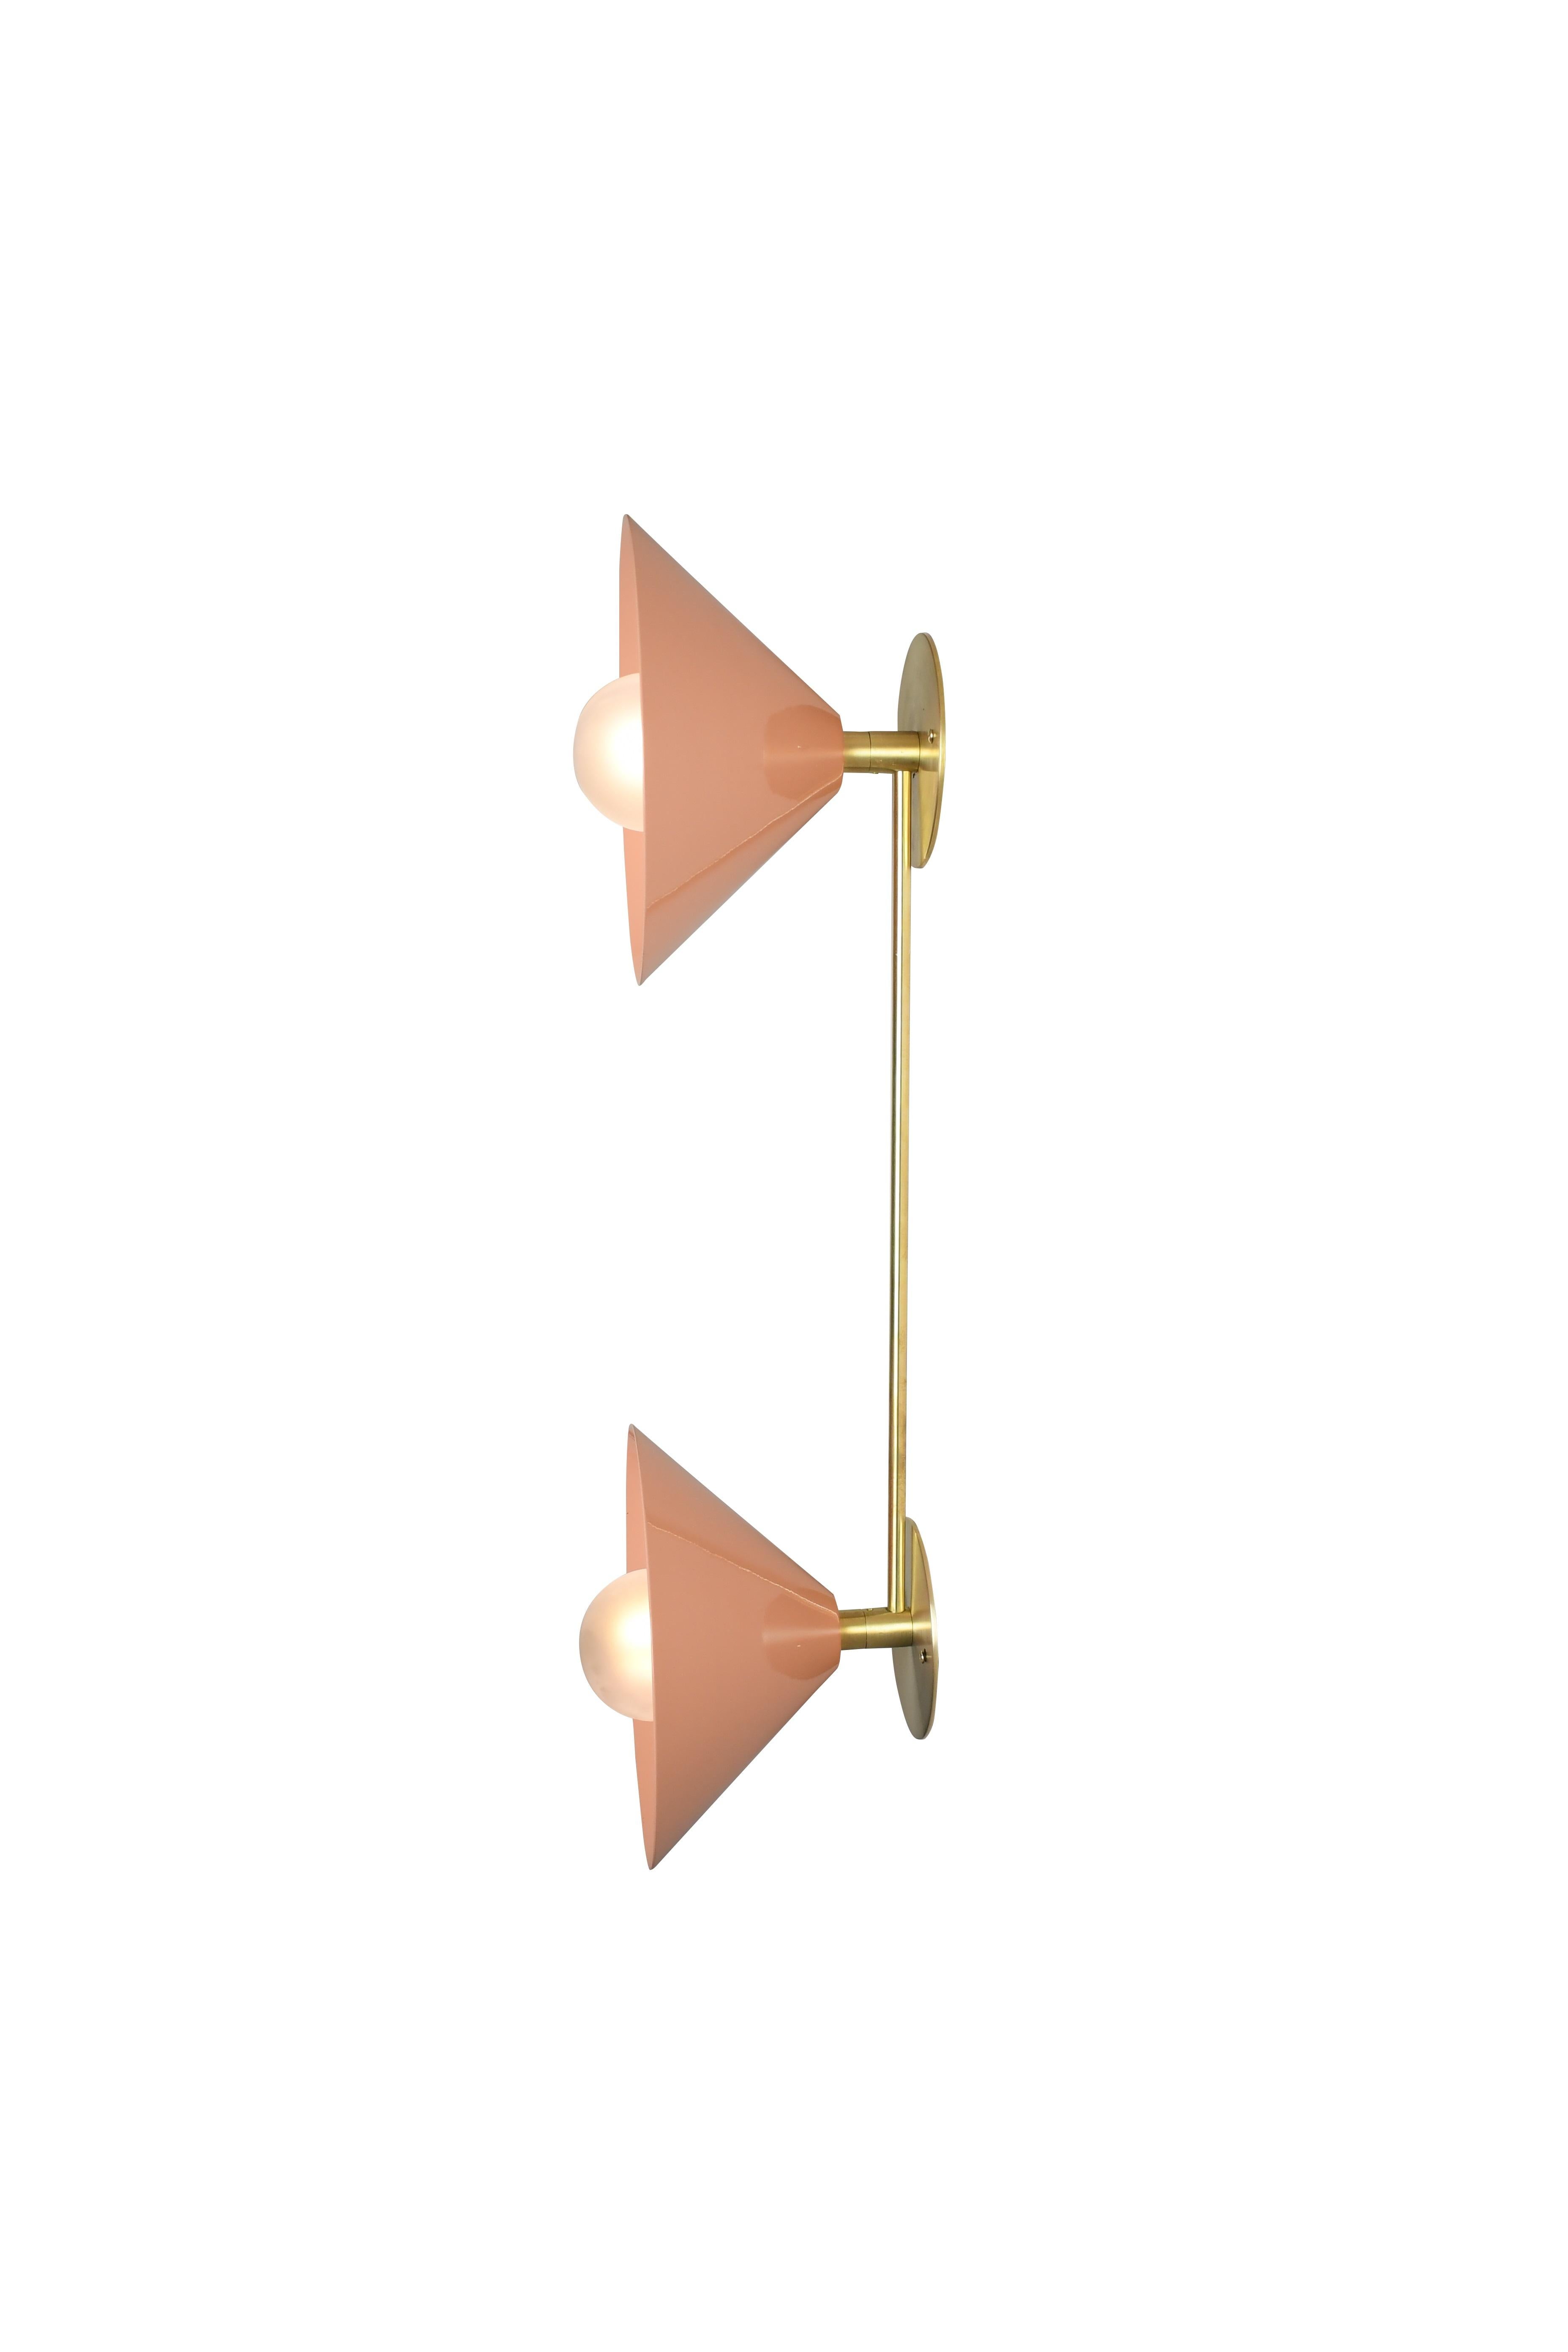 American Bi-Focal Wall Light in Brass and Blush Enamel by Blueprint Lighting, 2019 For Sale